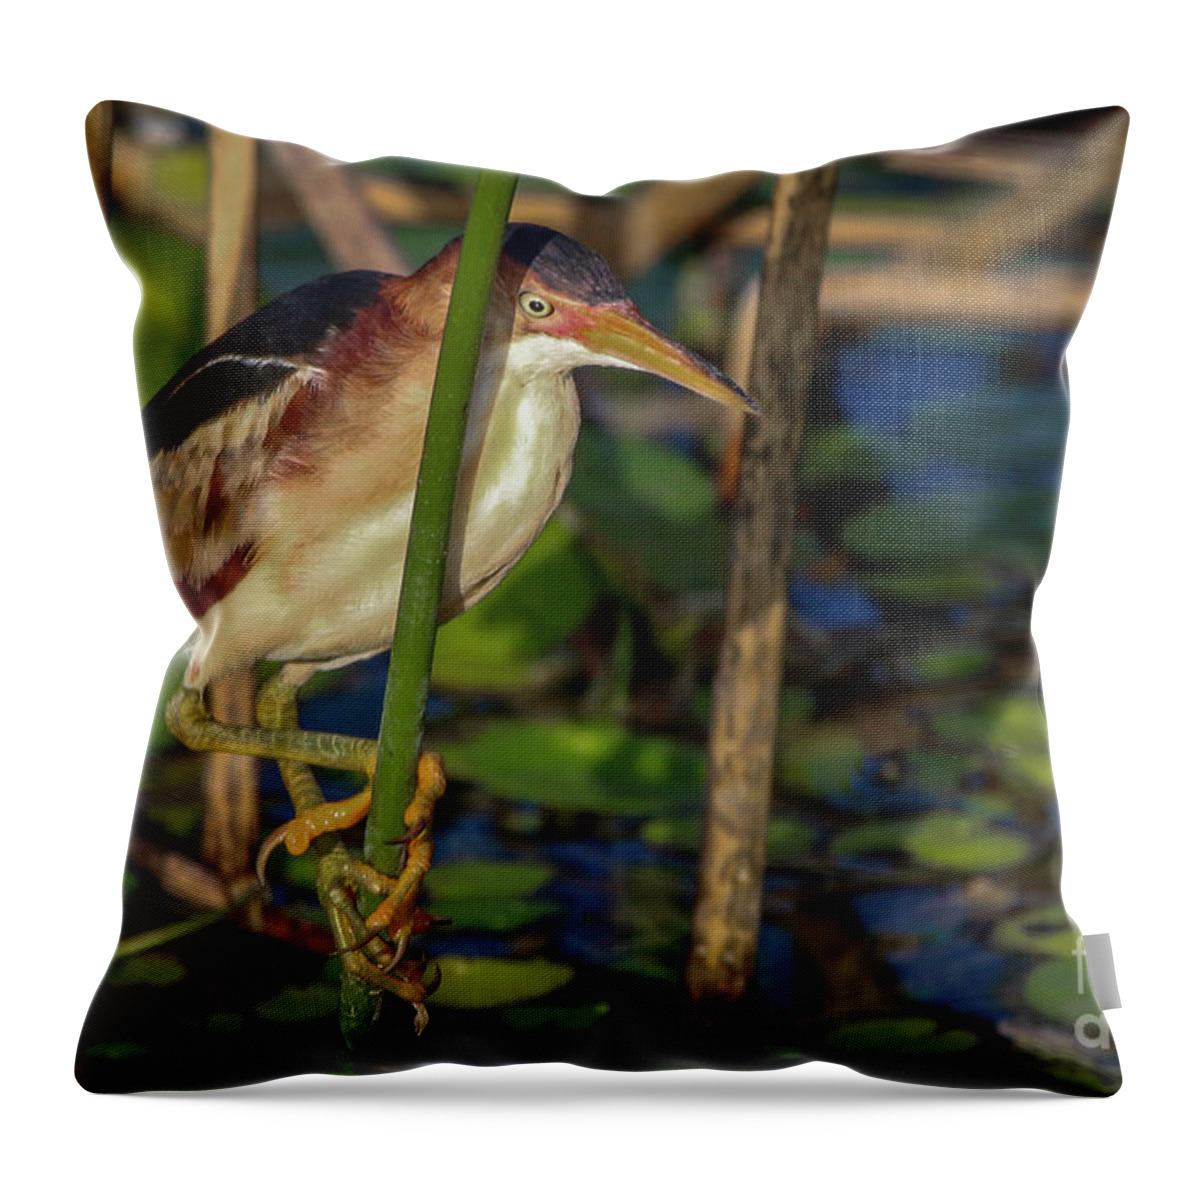 Bittern Throw Pillow featuring the photograph Vertical Perch Bittern by Tom Claud